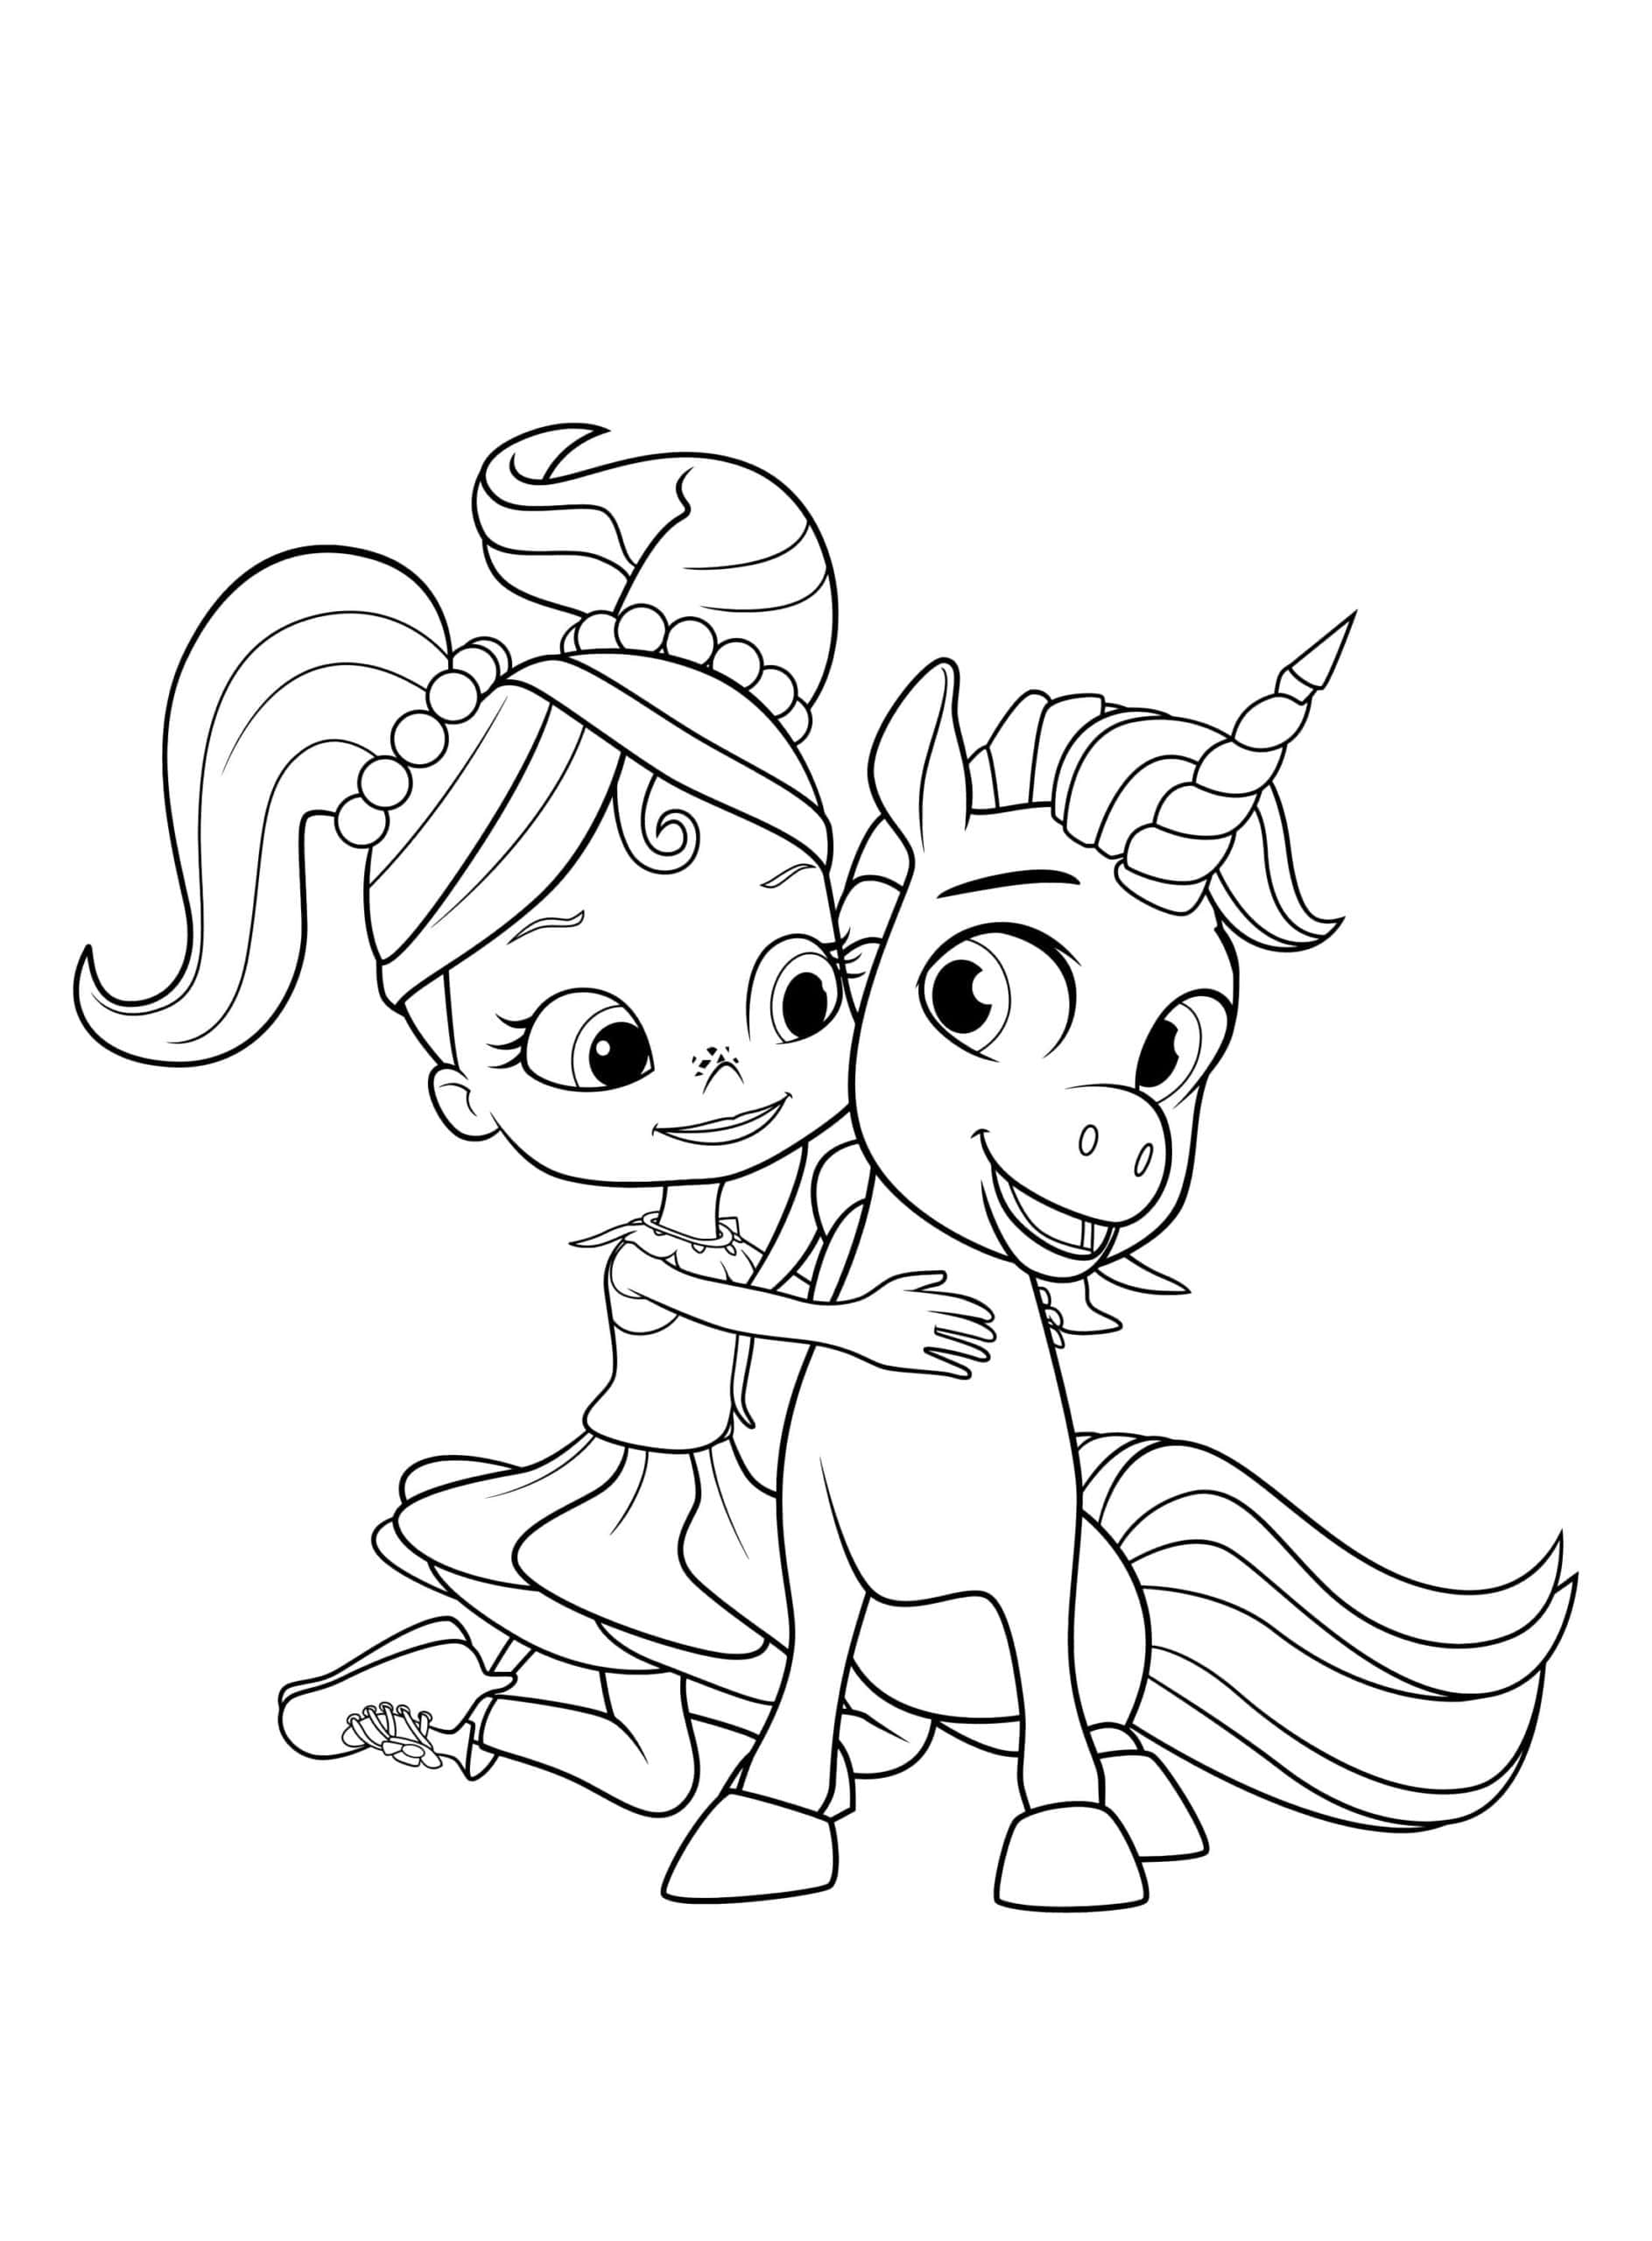 Rainbow Rangers coloring pages download for kids